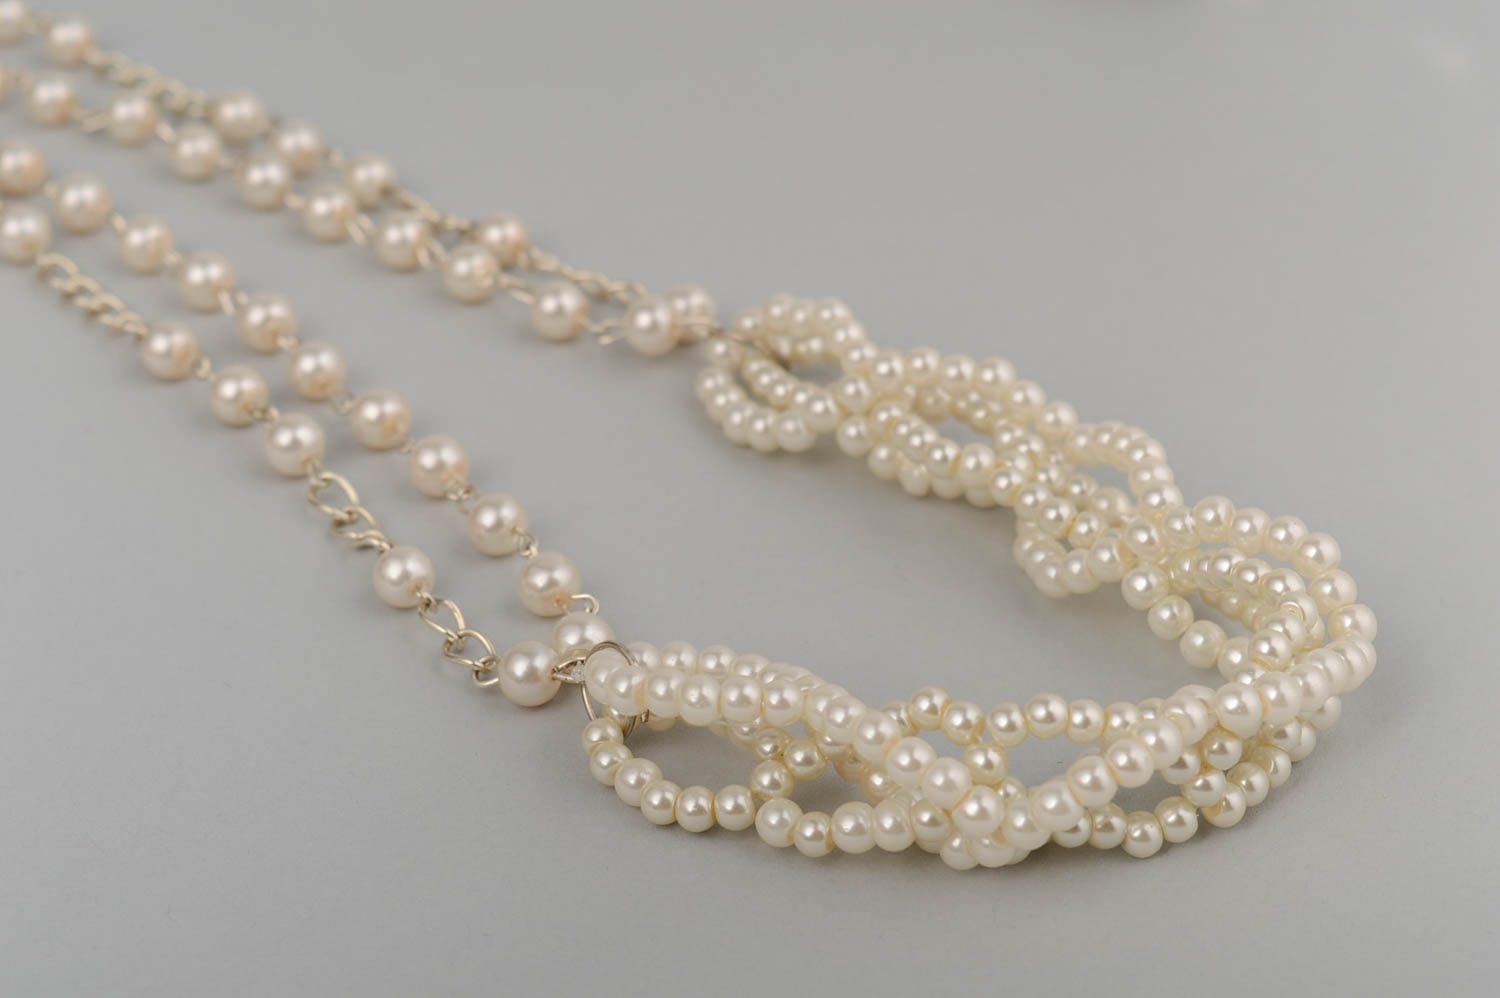 Handmade decorative white ceramic pearl beads necklace long fancy accessory photo 5